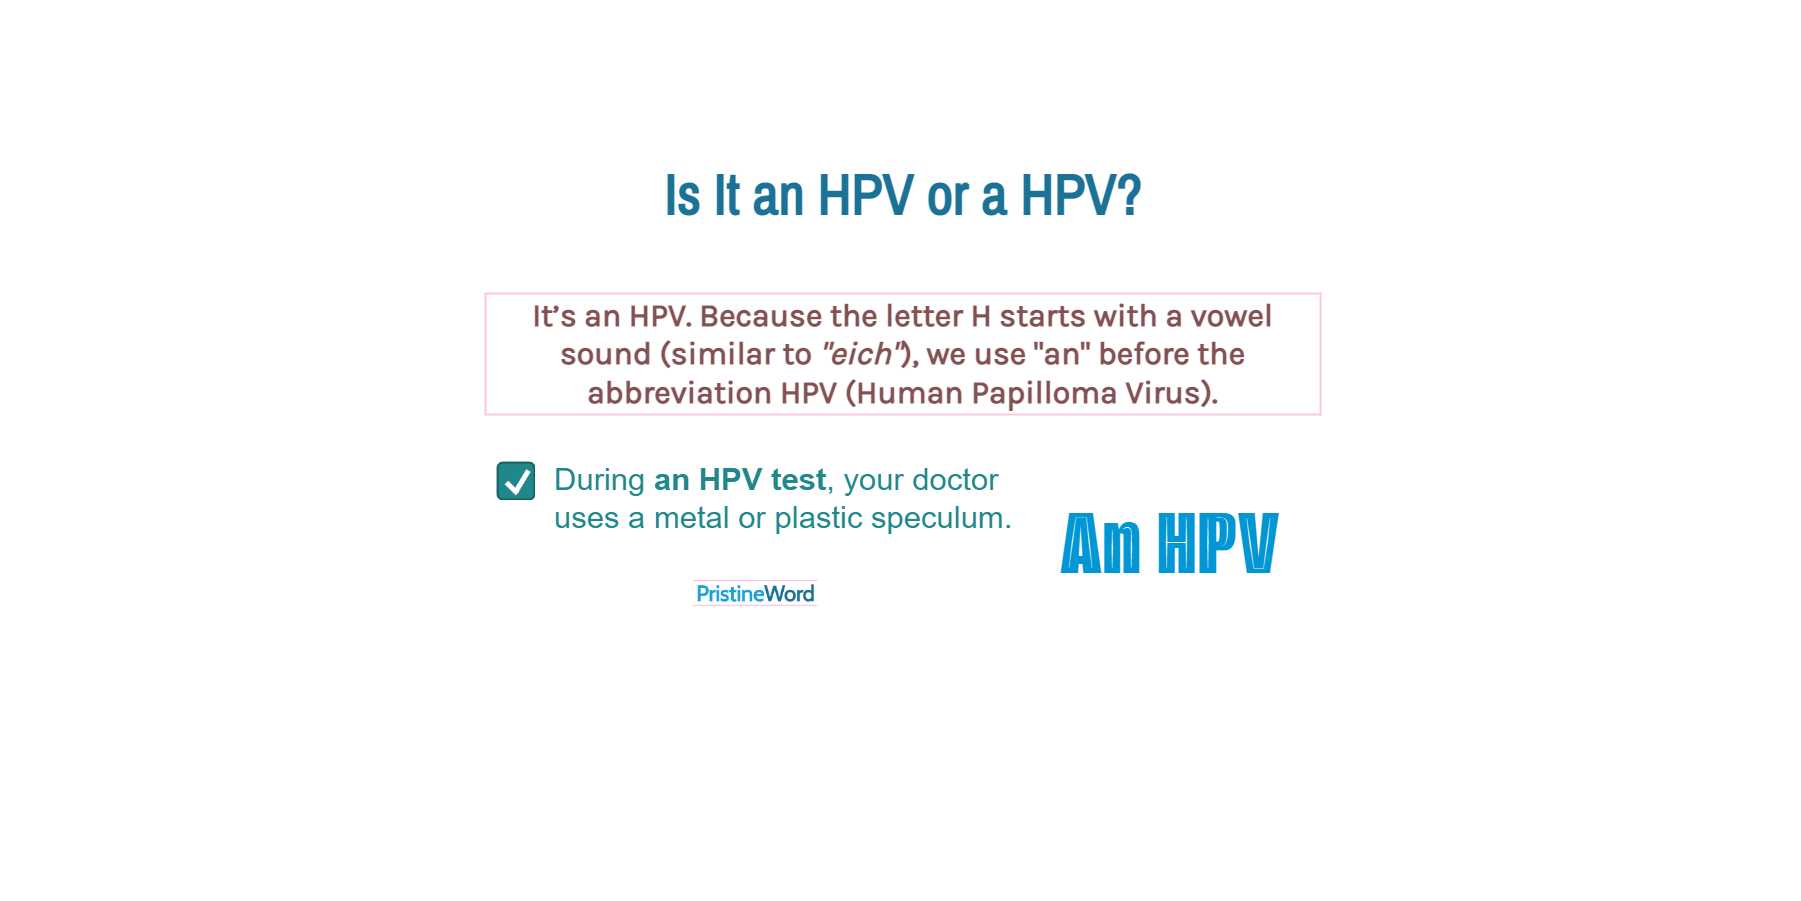 Is It an HPV or a HPV?